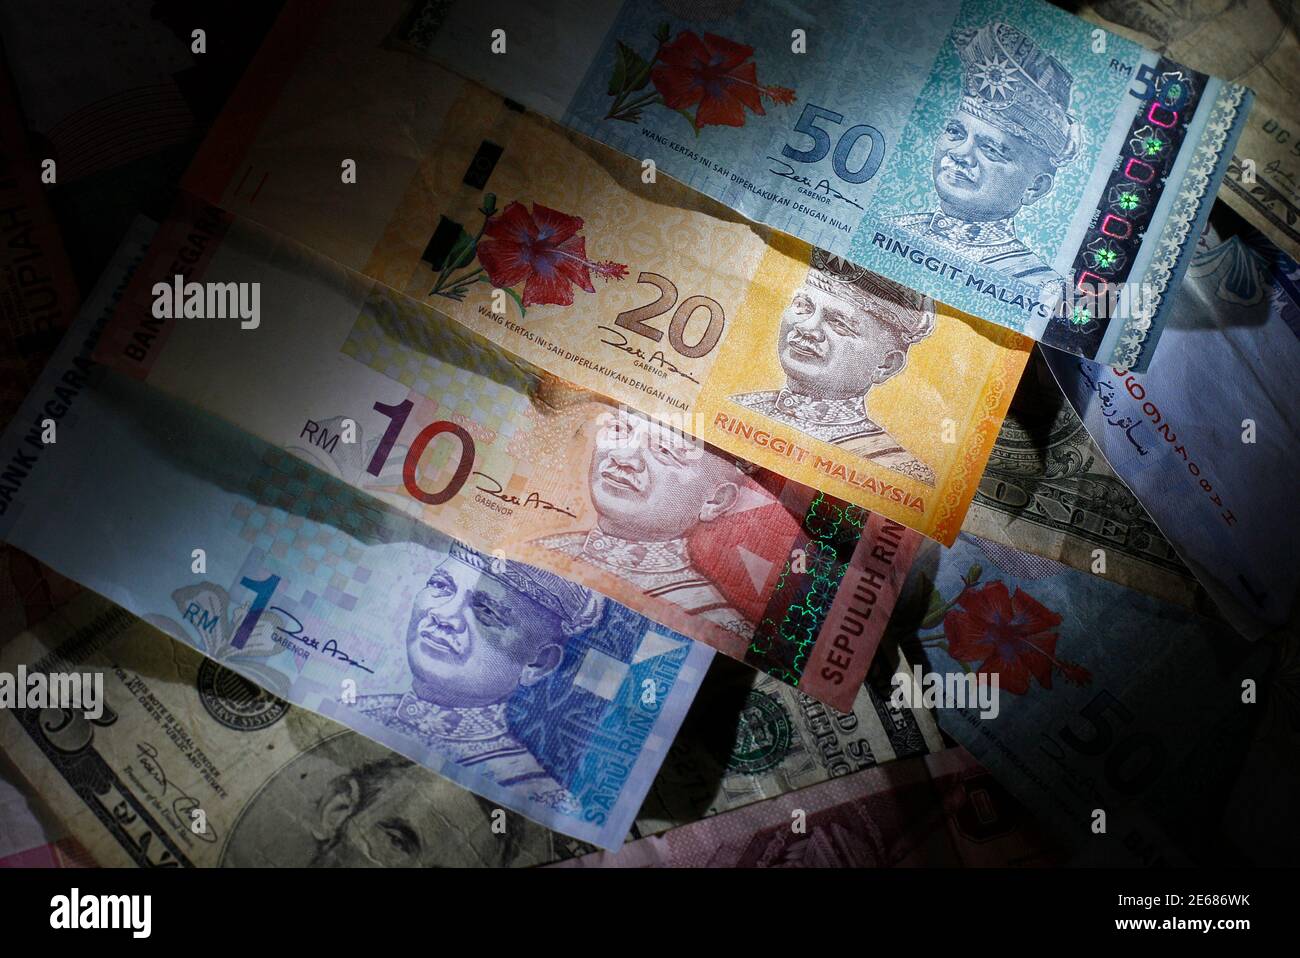 Currency to malaysia singapore SG